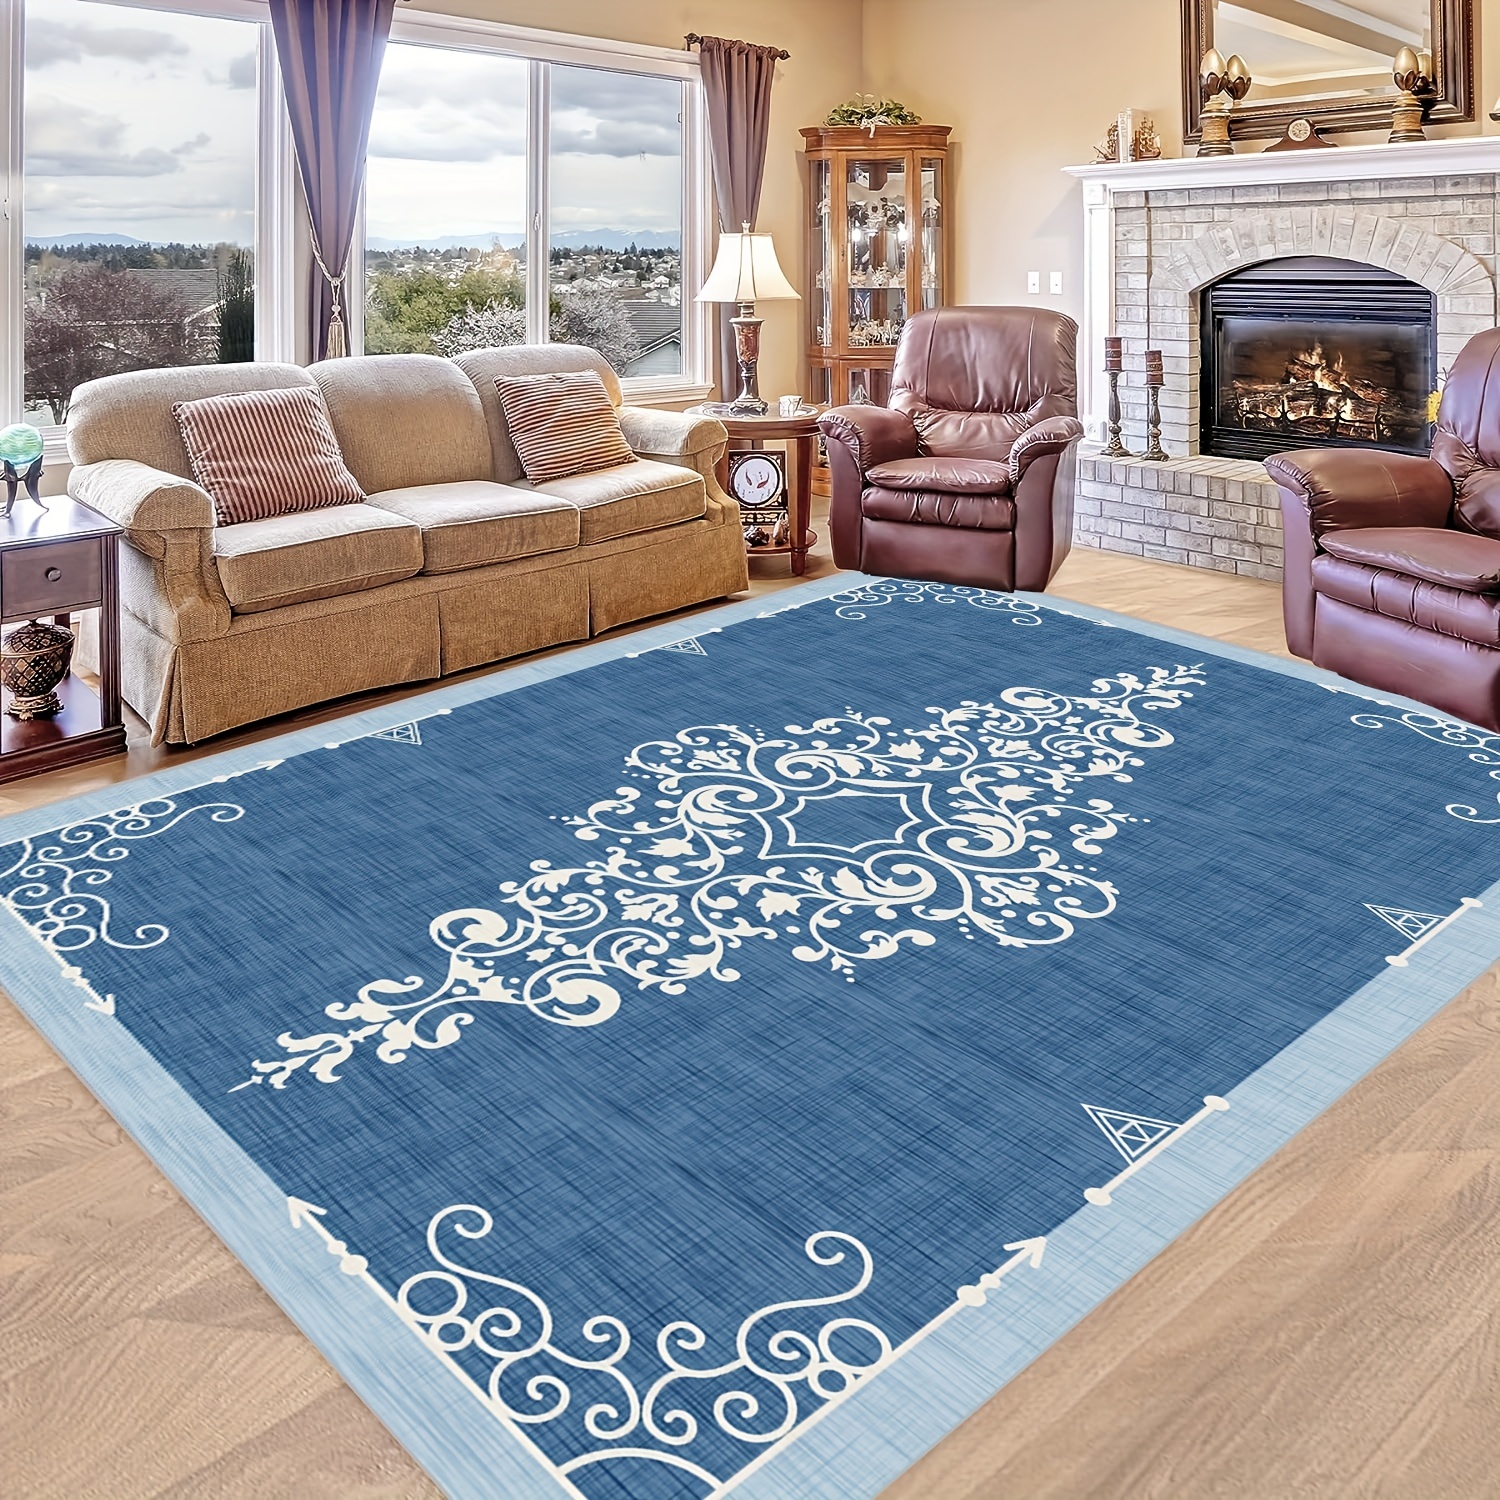  Teal Kitchen Rugs and Mats 2 Piece Non Slip Washable